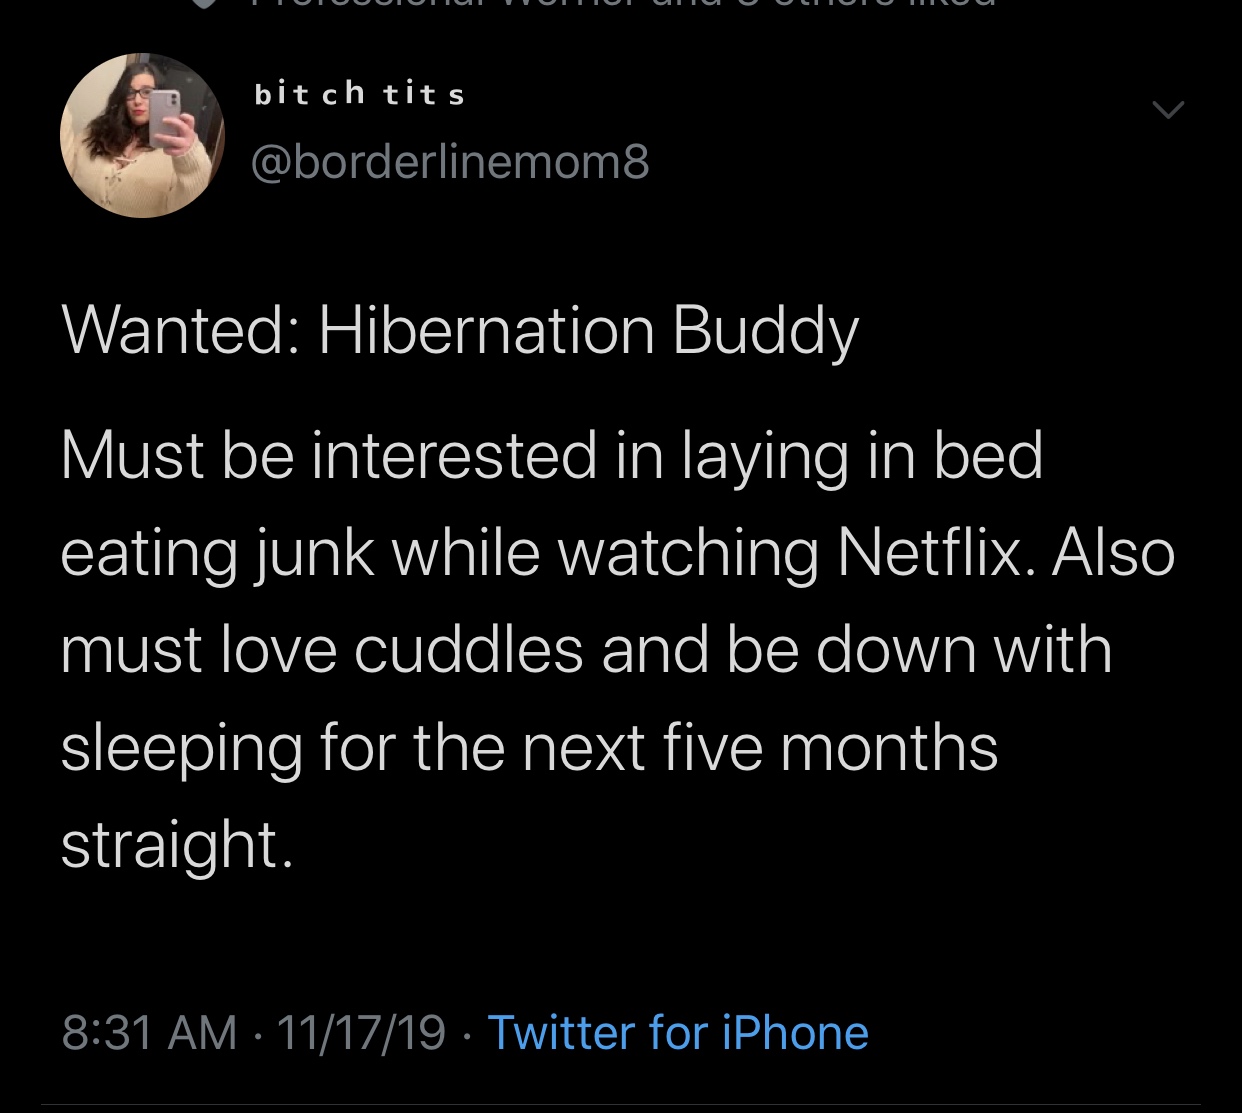 run like an animal - bitch tits Wanted Hibernation Buddy Must be interested in laying in bed eating junk while watching Netflix. Also must love cuddles and be down with sleeping for the next five months straight. 111719 Twitter for iPhone